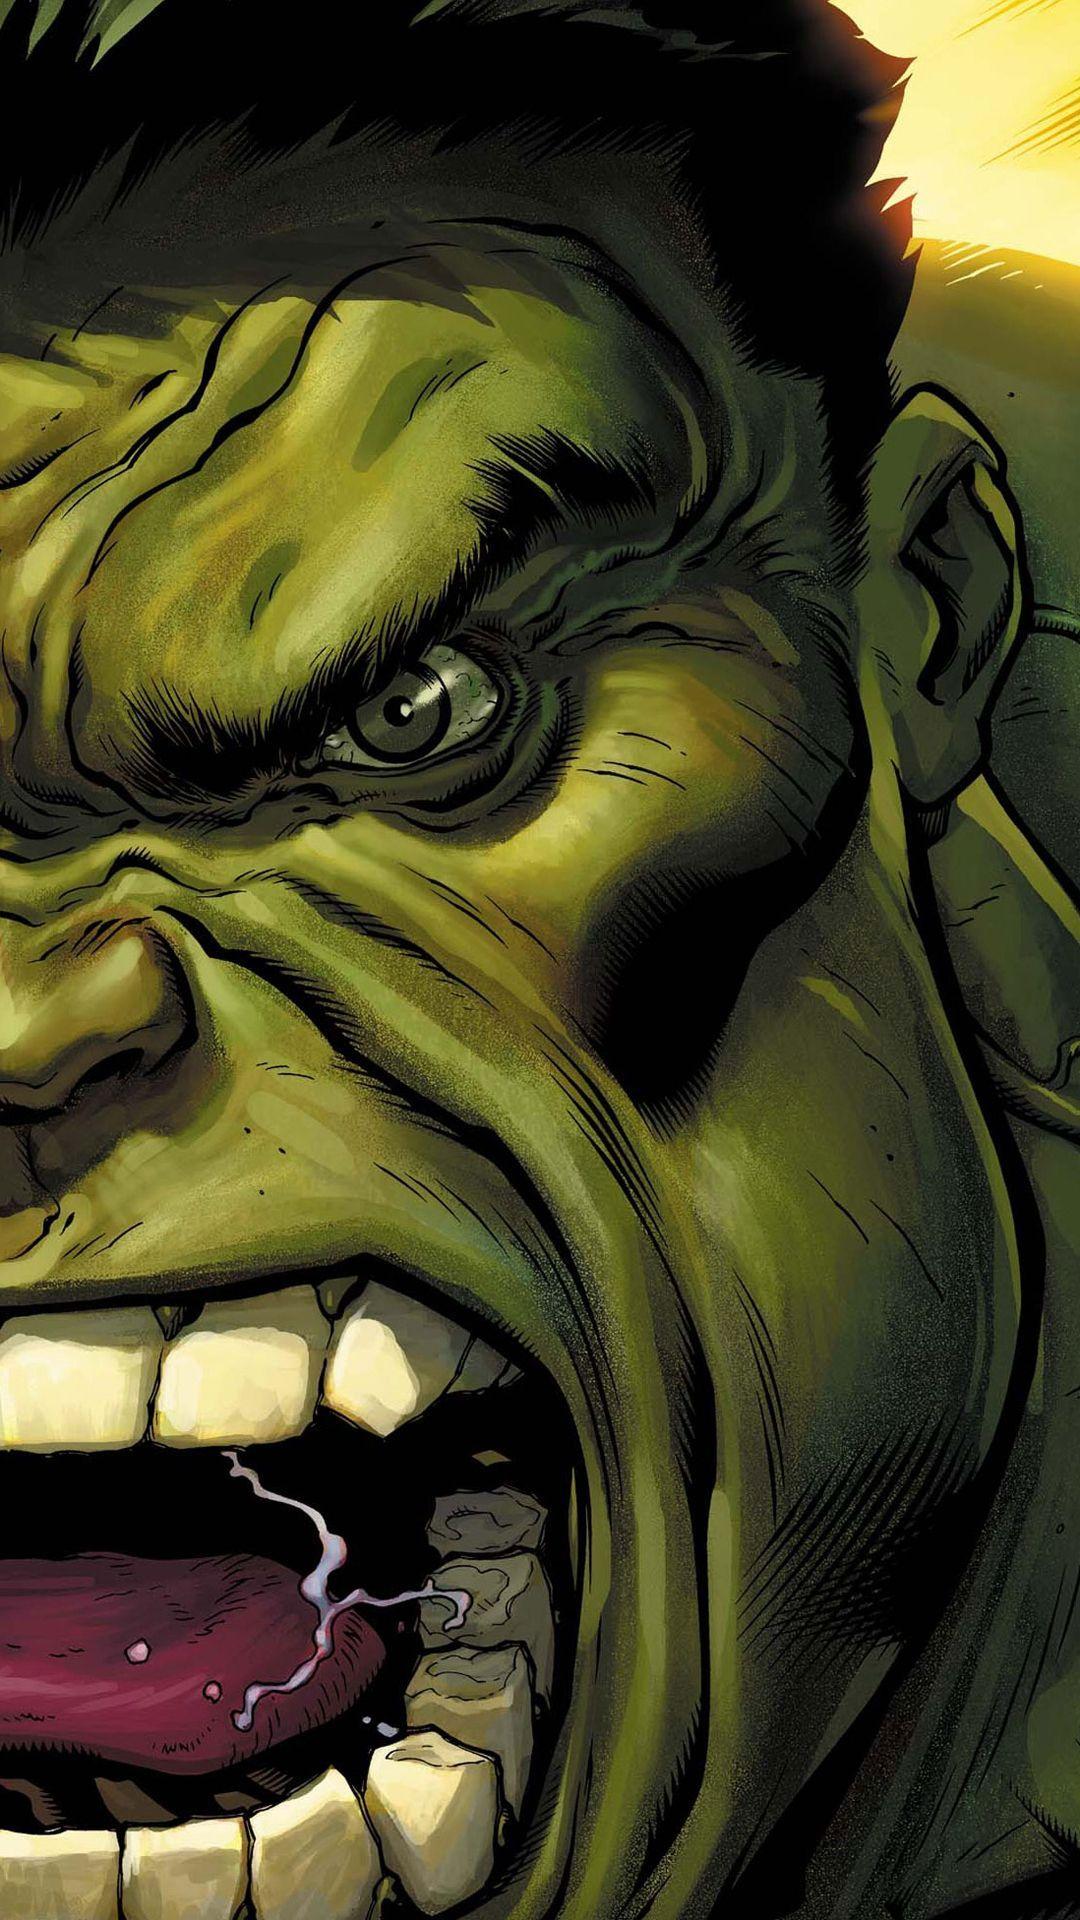 The Hulk Screaming Illustration Android Wallpaper. crier